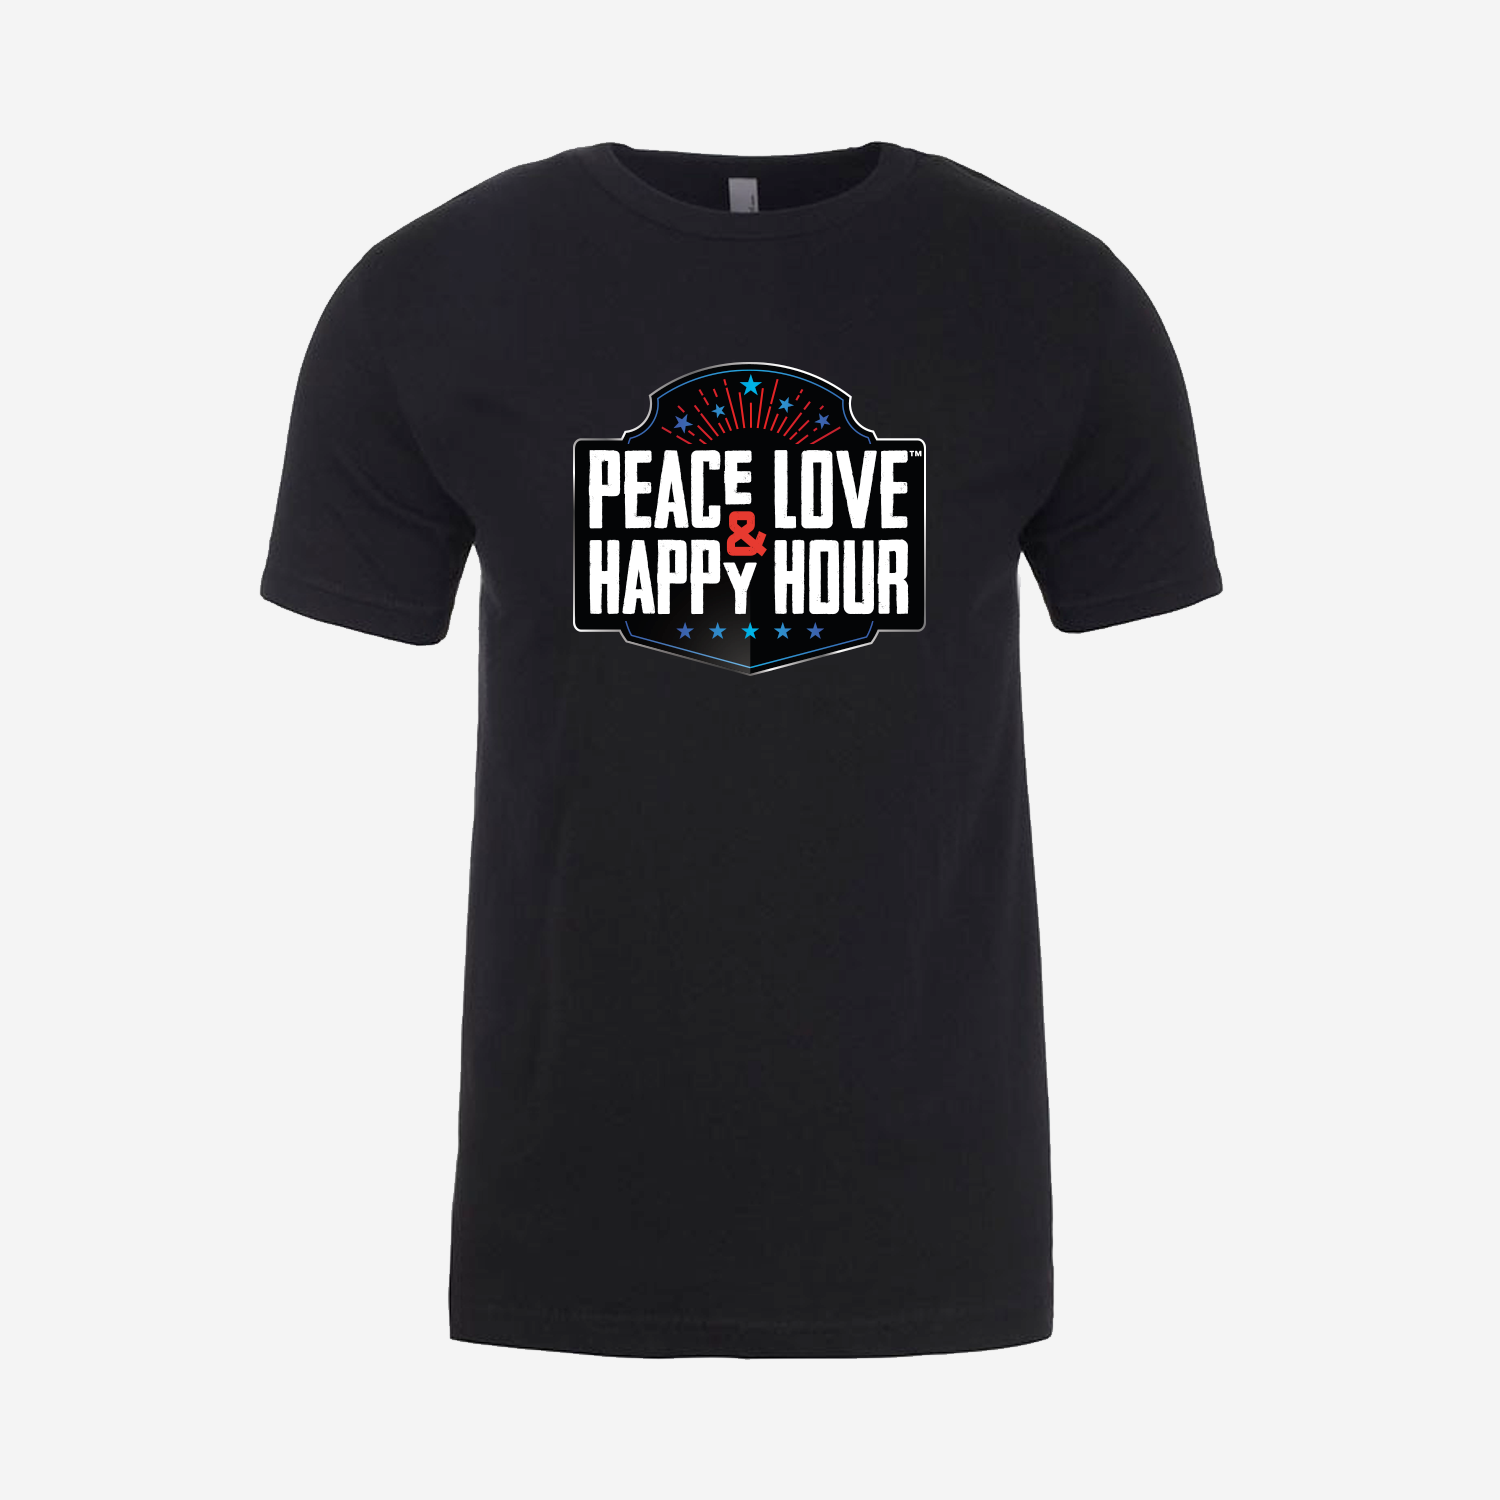 Badlands T-Shirt – Peace Happy Love Hour and